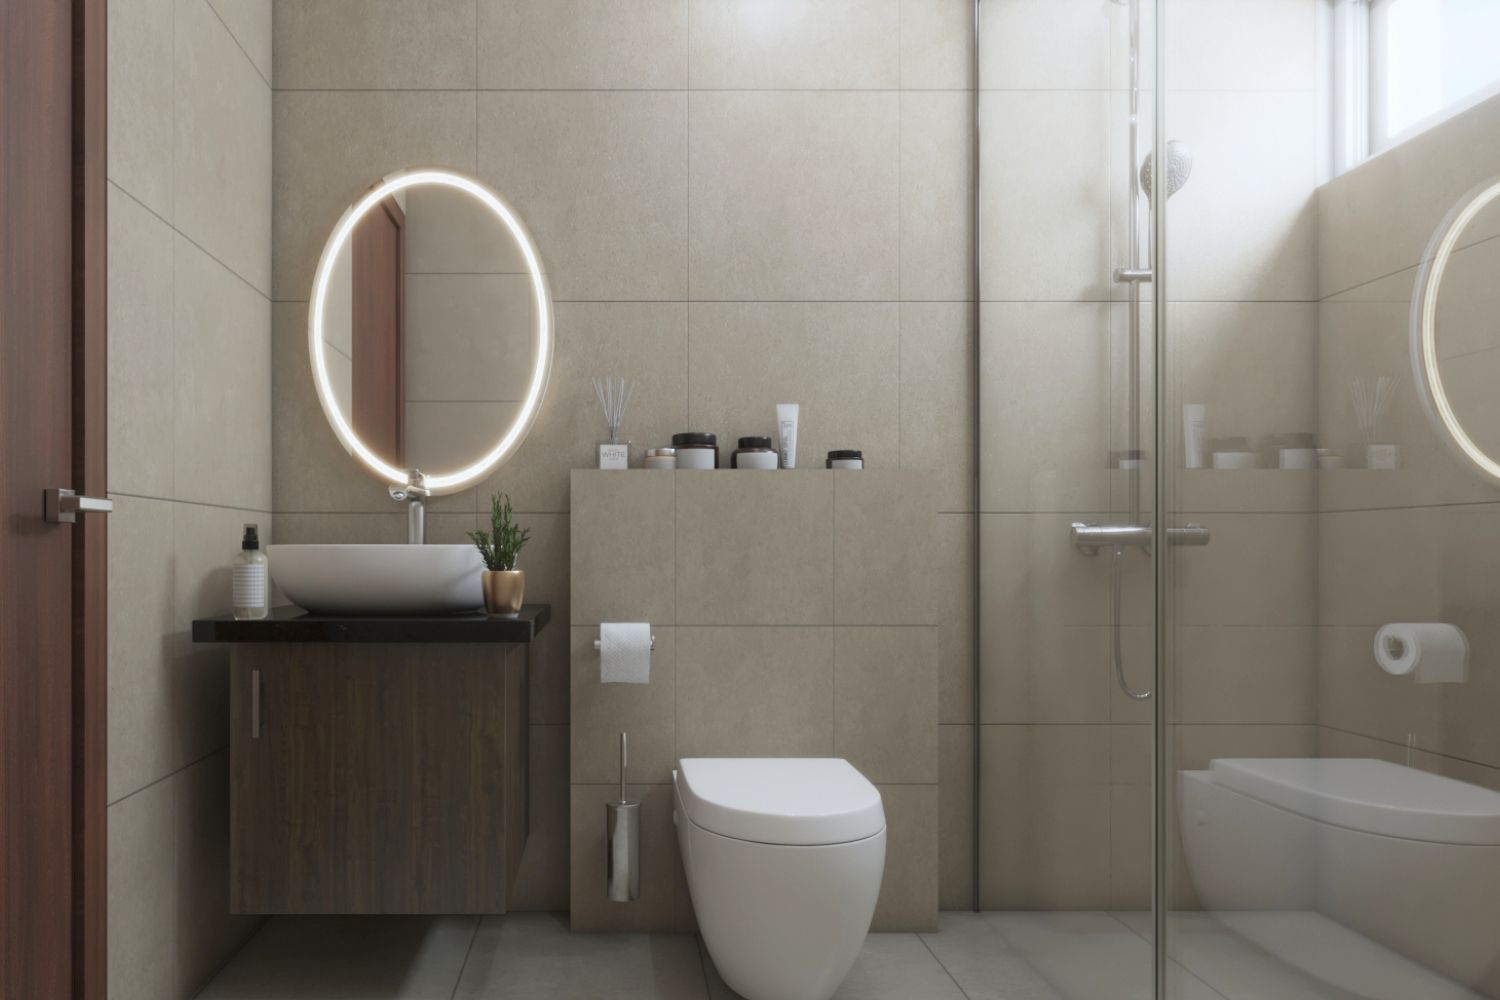 Modern Beige Bathroom Design With LED Oval Mirror And Wooden Bathroom Cabinet